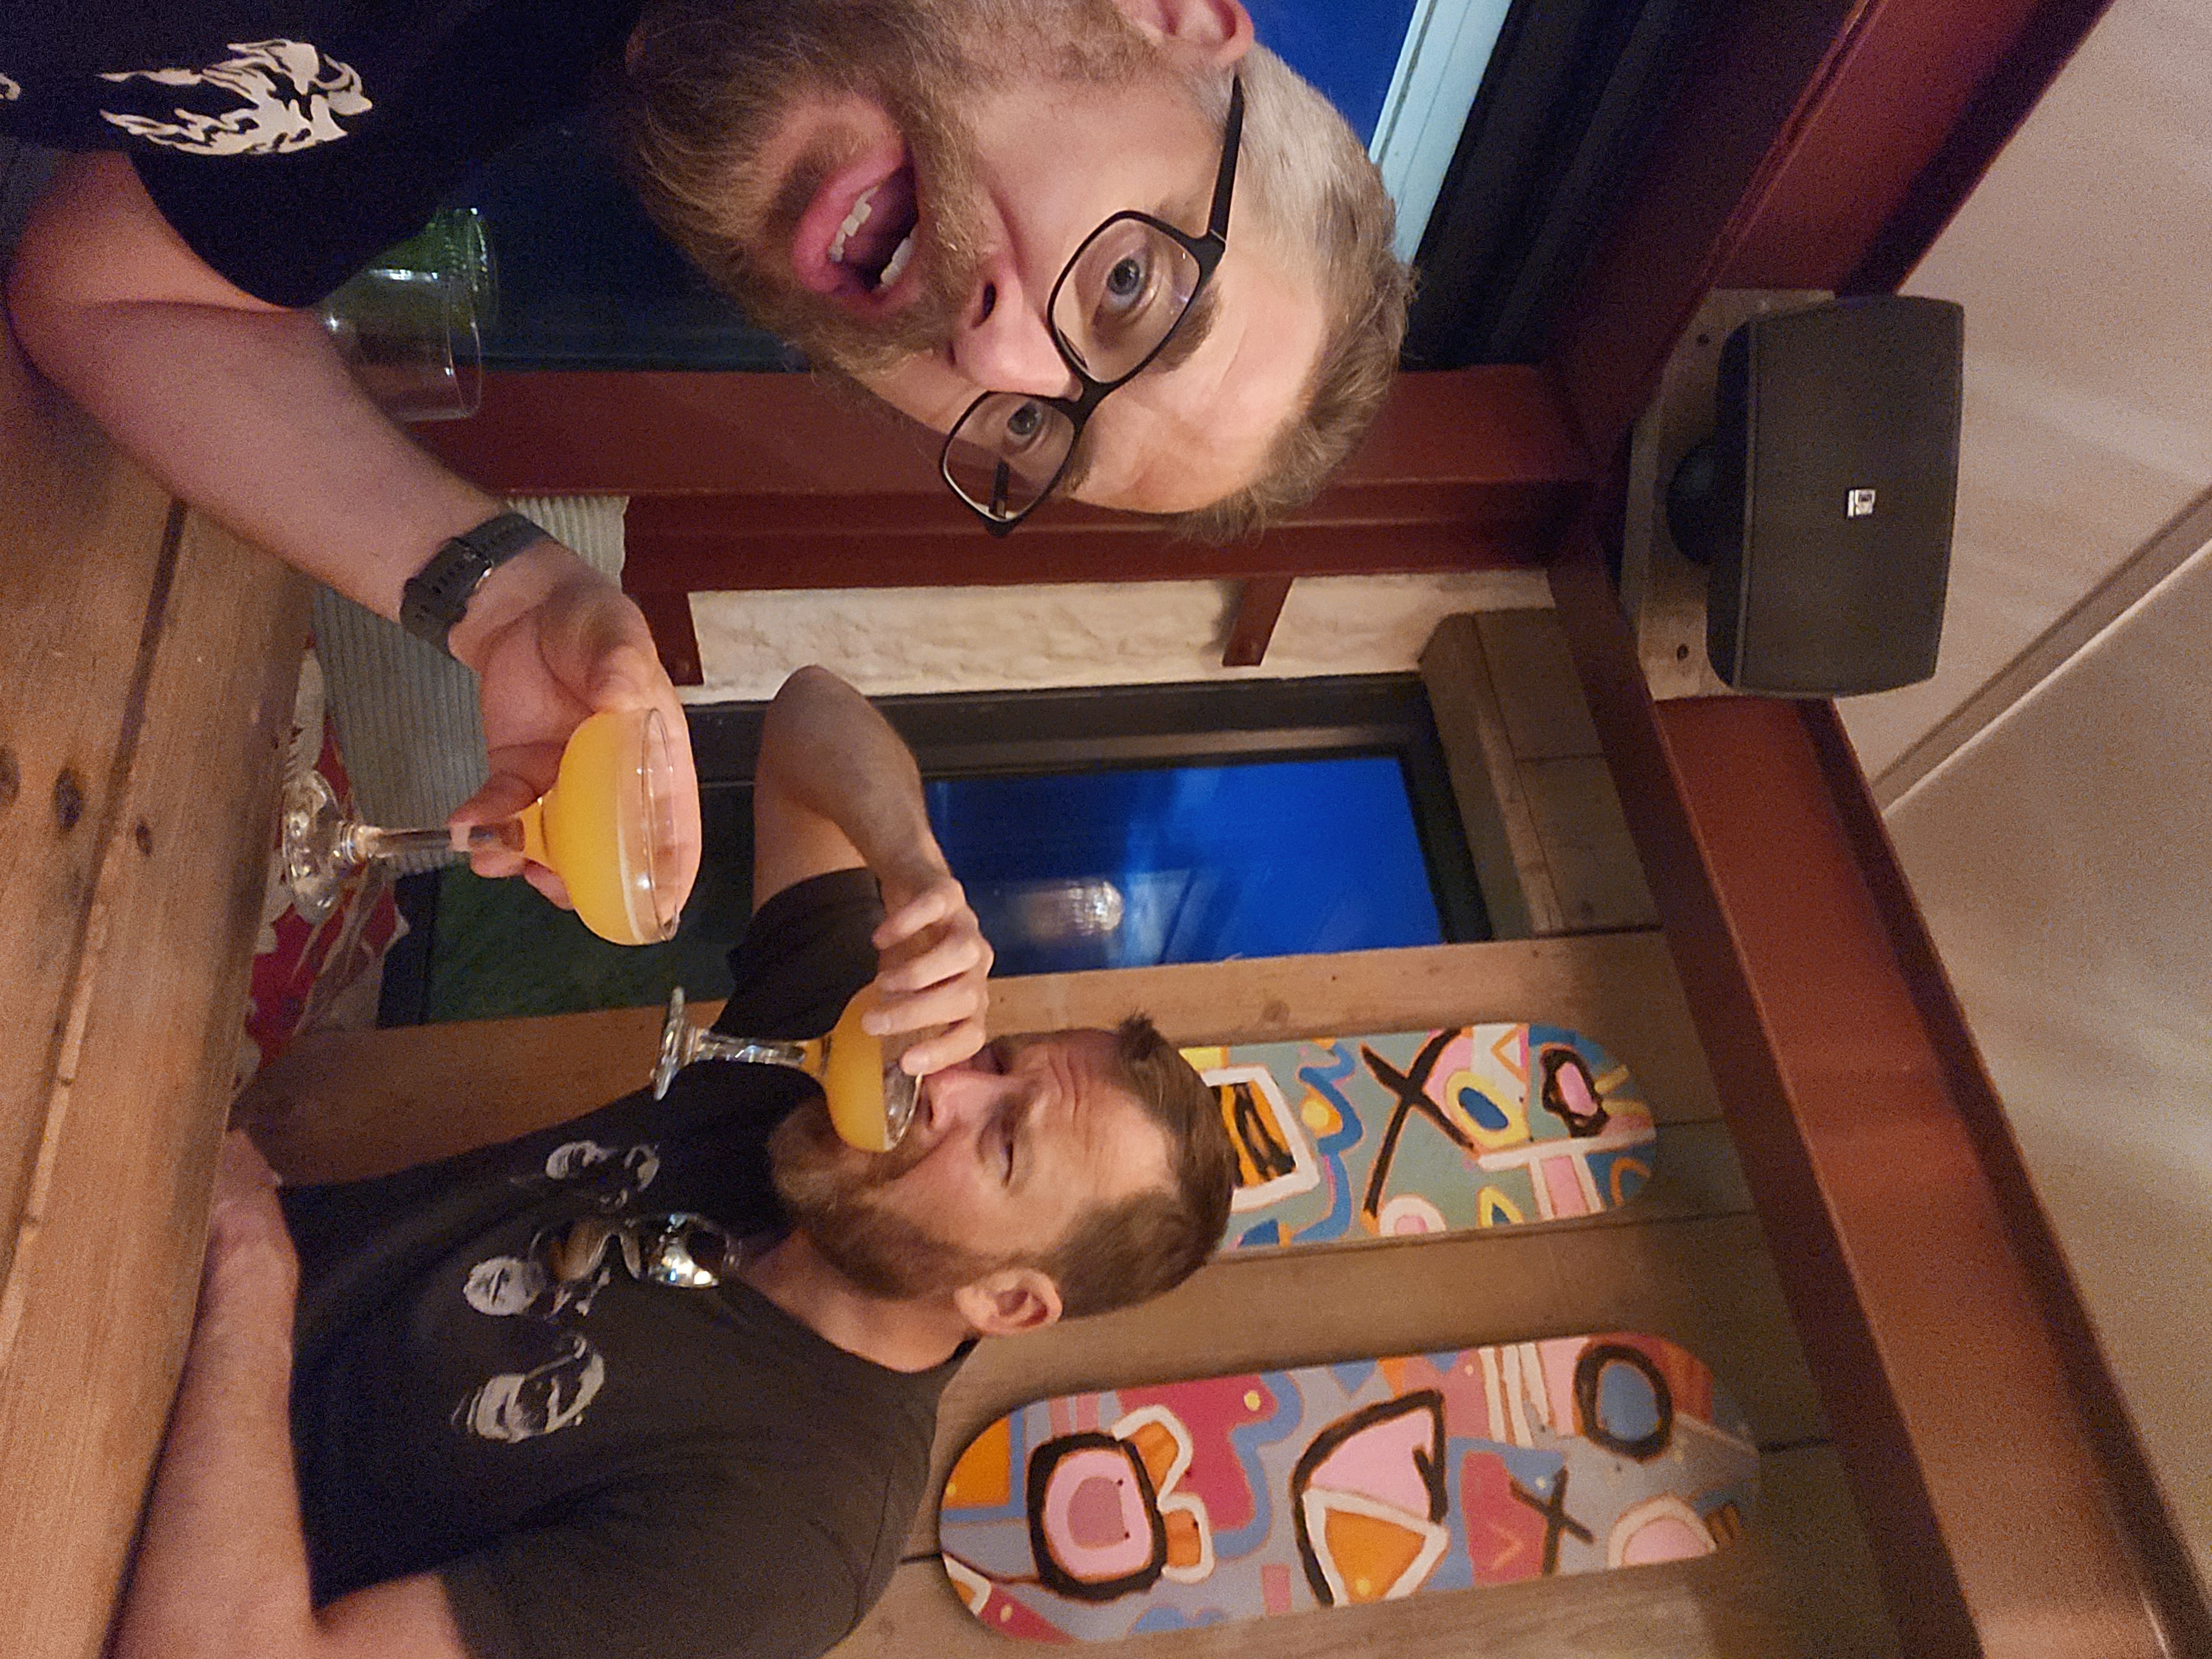 Chris and I drinking a mai tai, Chris is not impressed with it